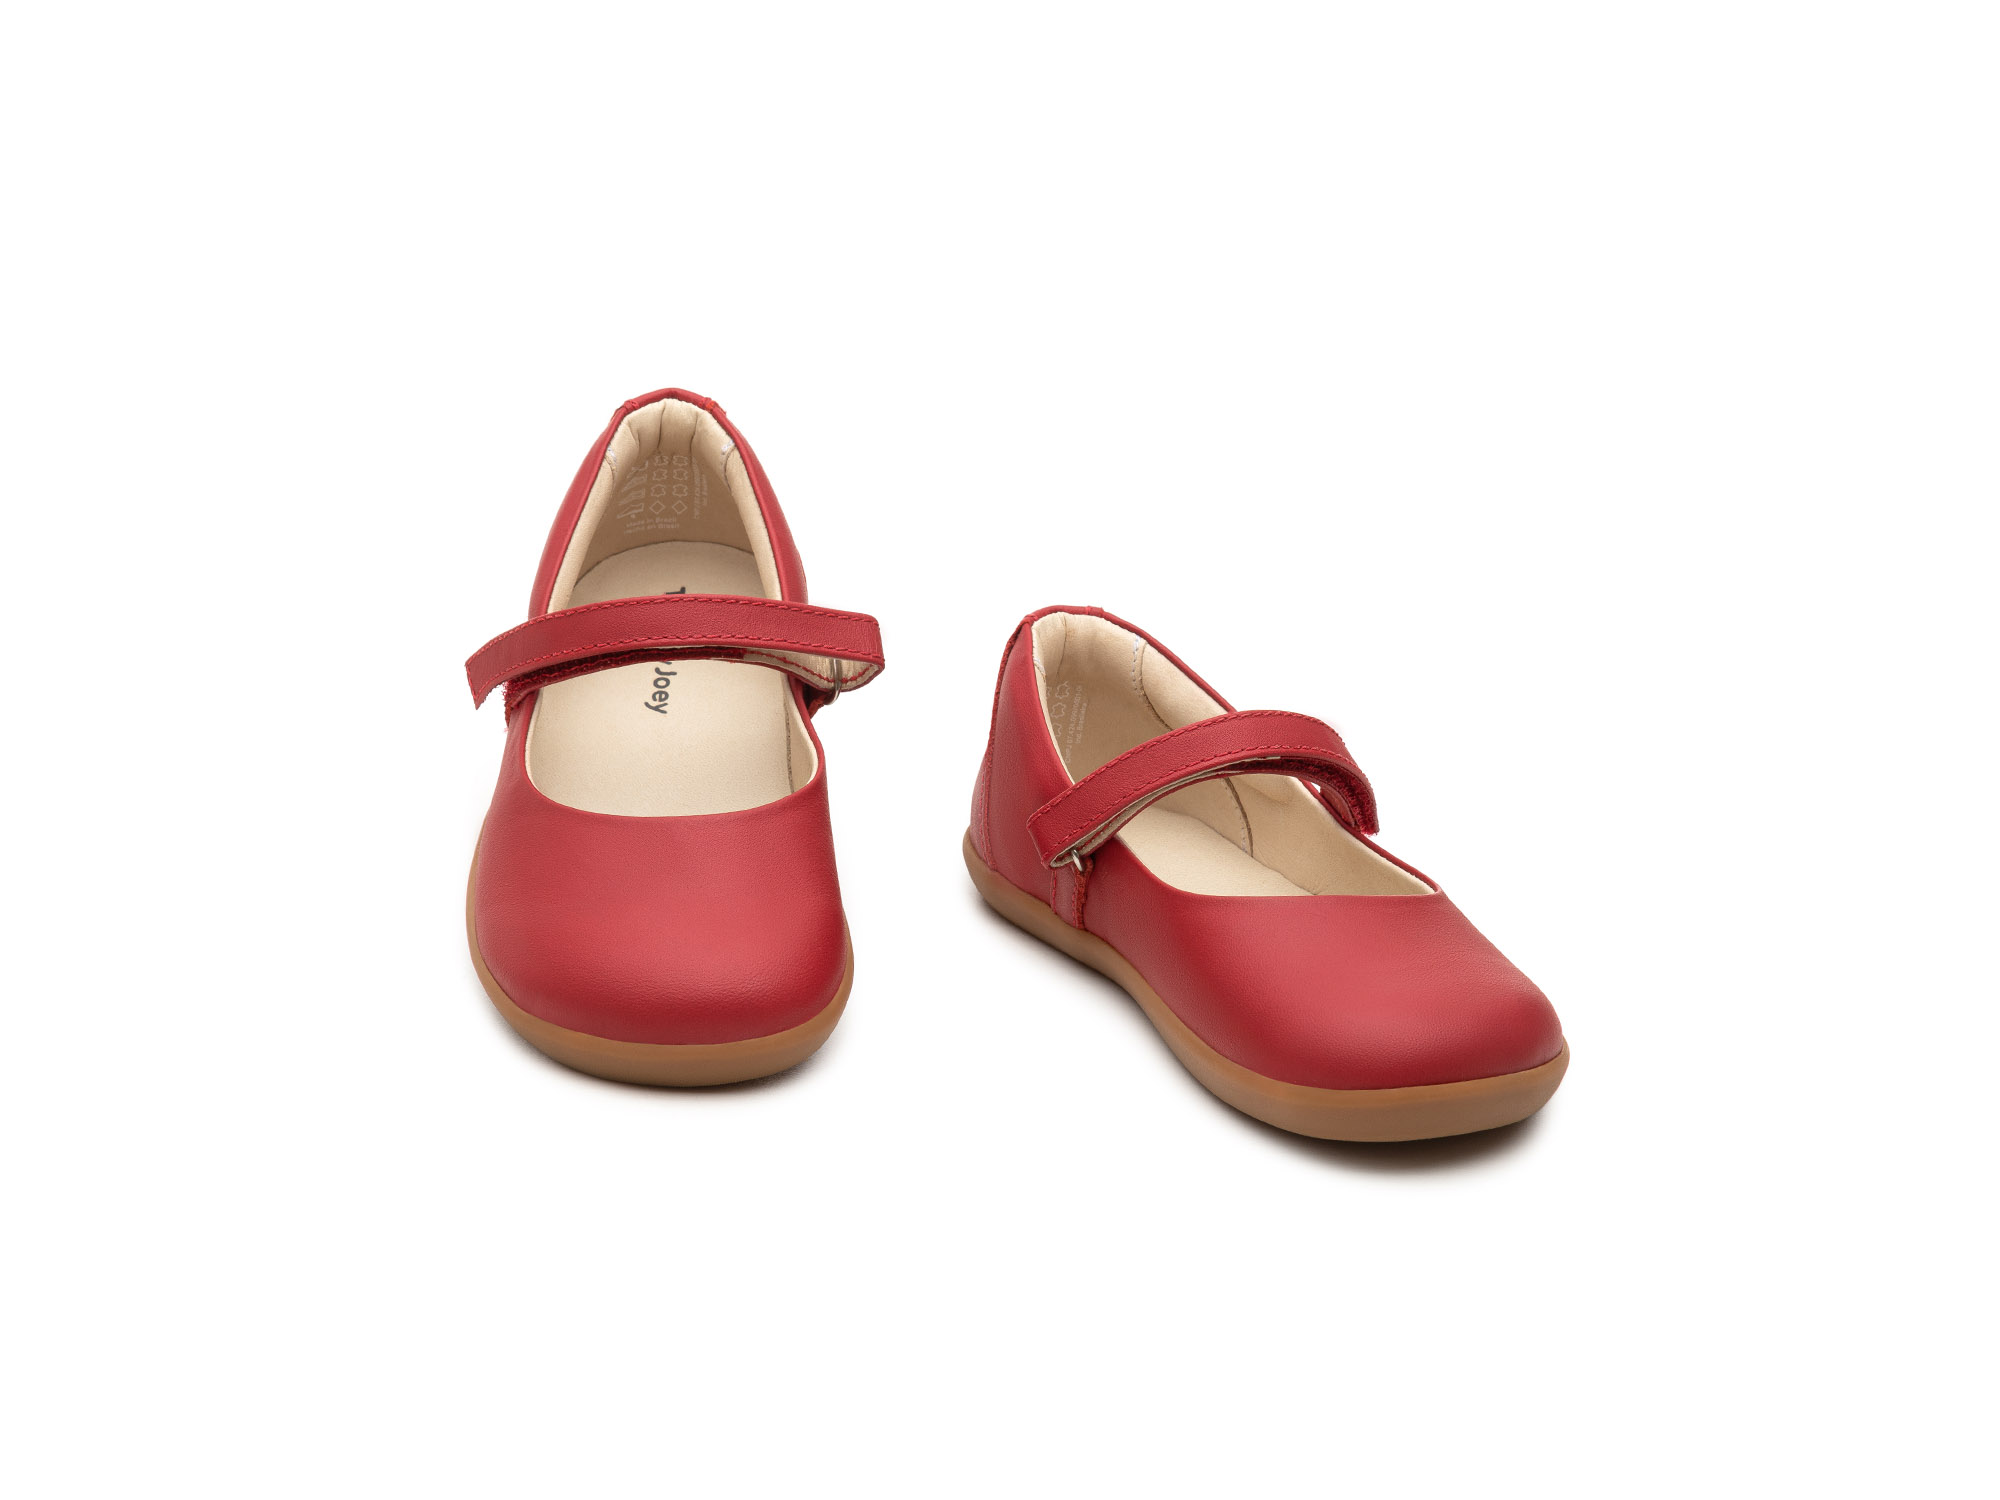 RUN & PLAY Mary Janes for Girls Little Catch | Tip Toey Joey - Australia - 2